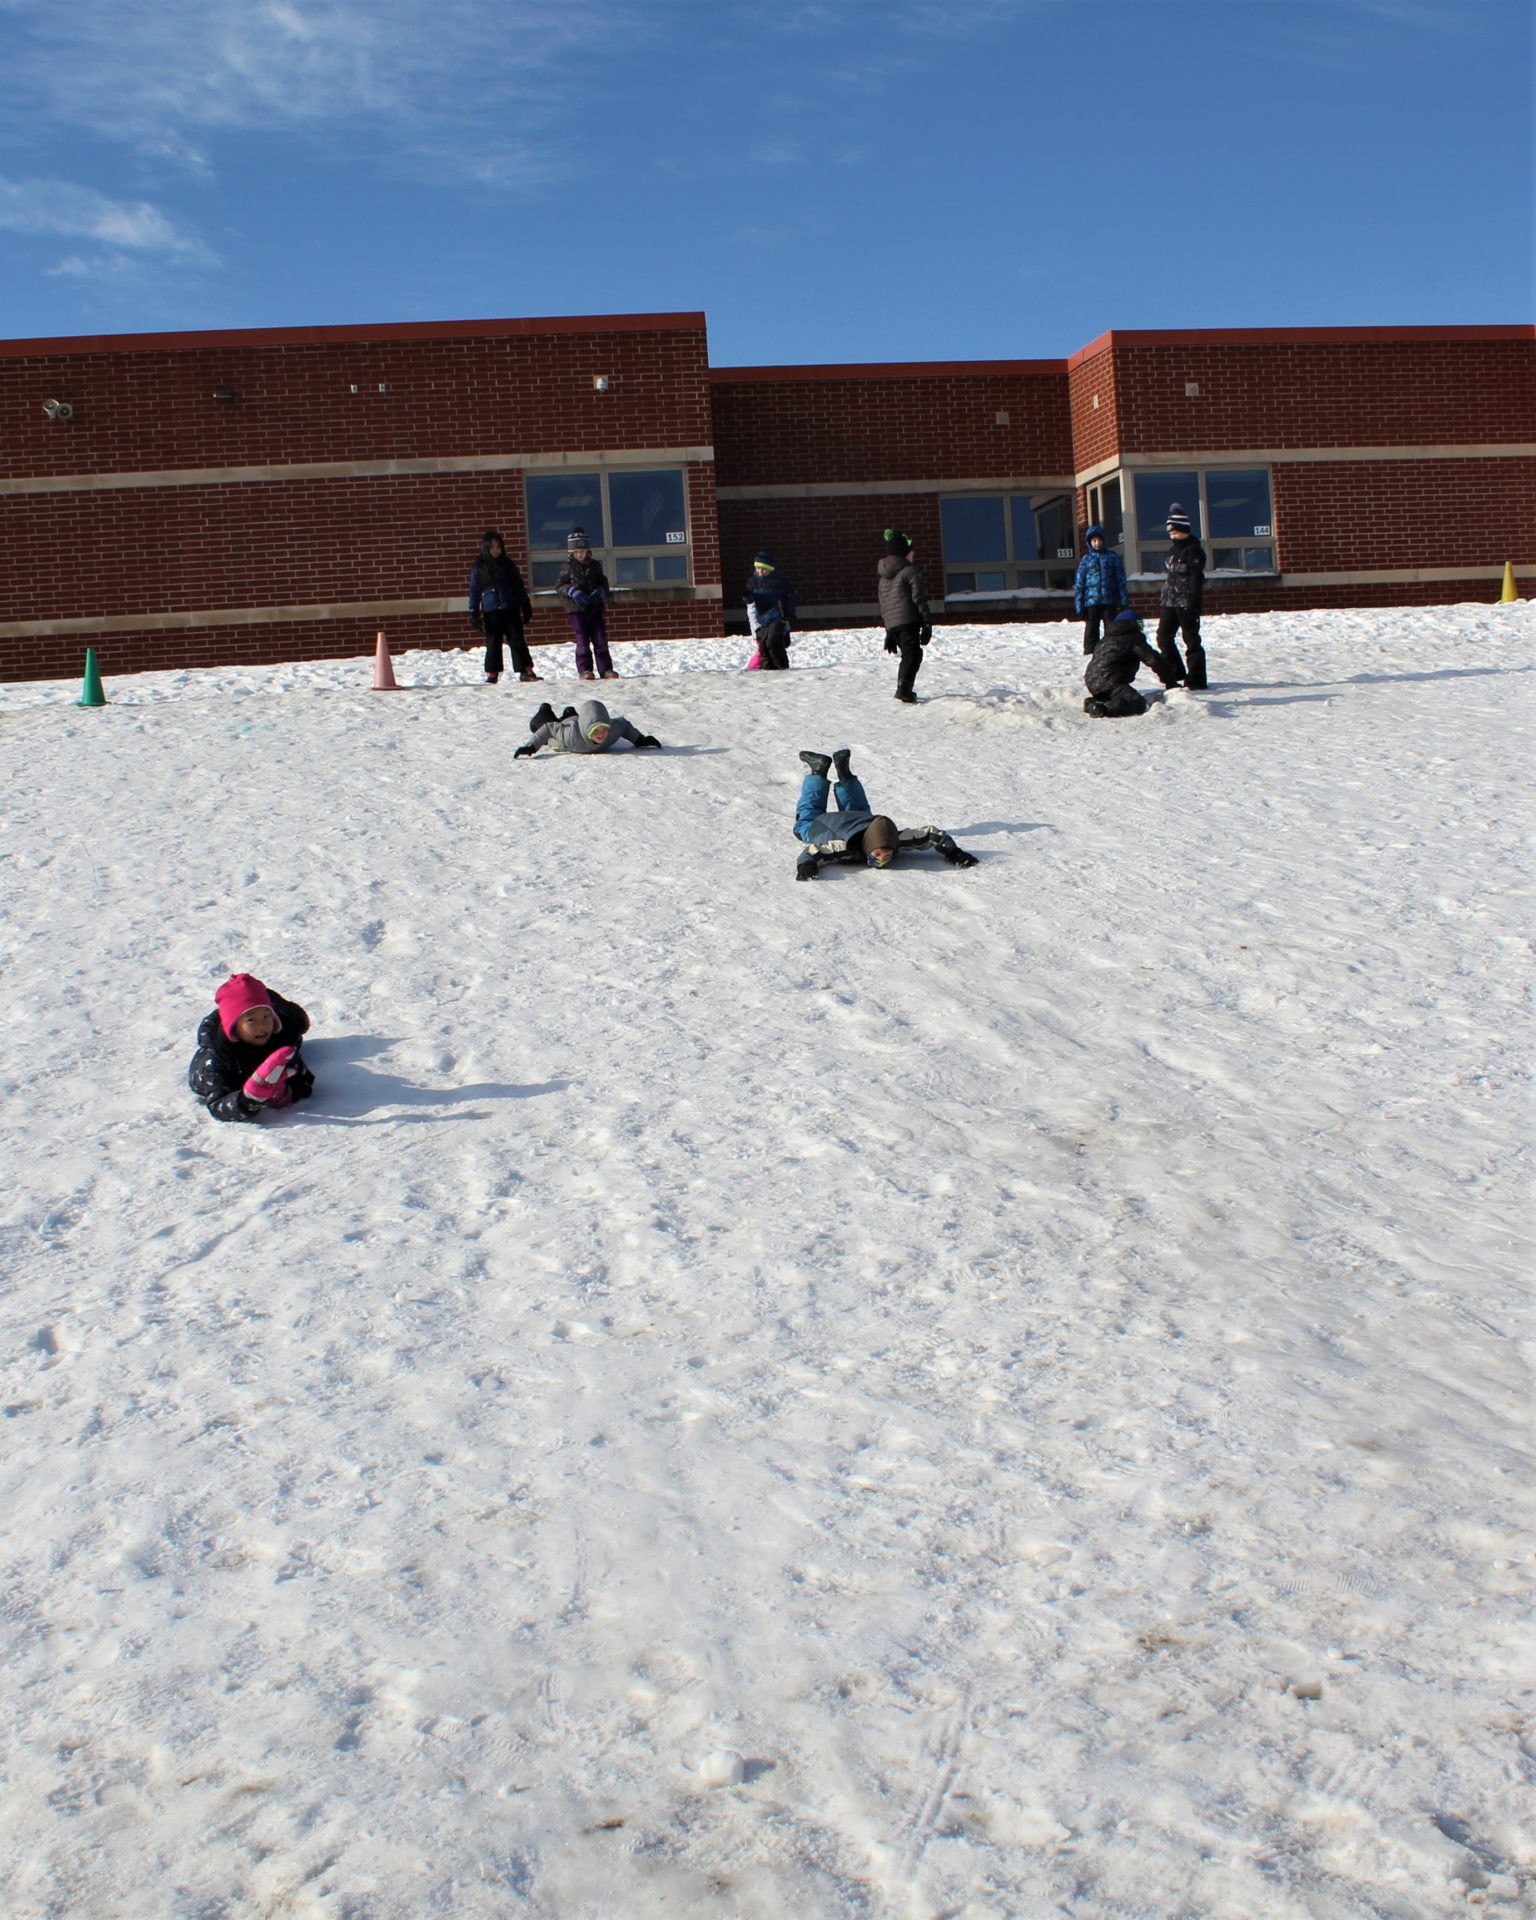 A group of children sliding down the hill.